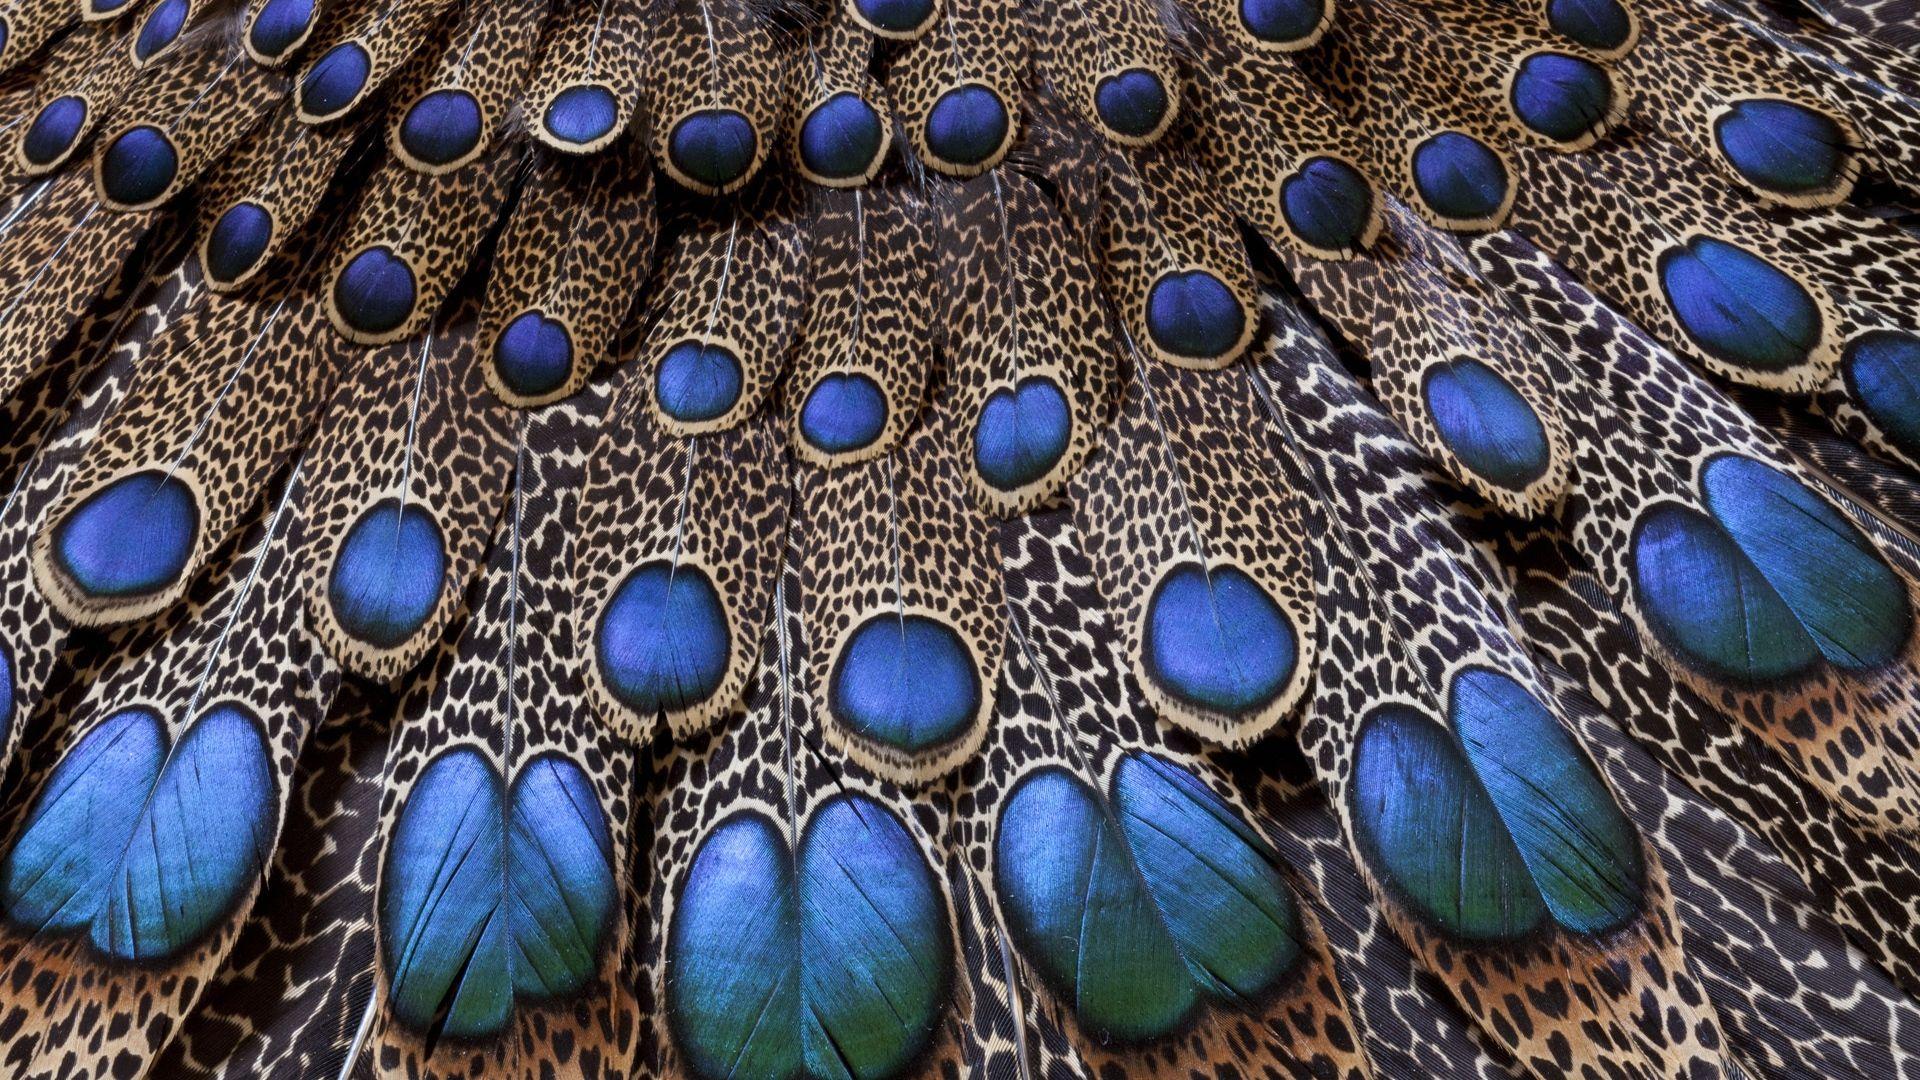 Download Wallpaper 1920x1080 feathers, peacock, light, background